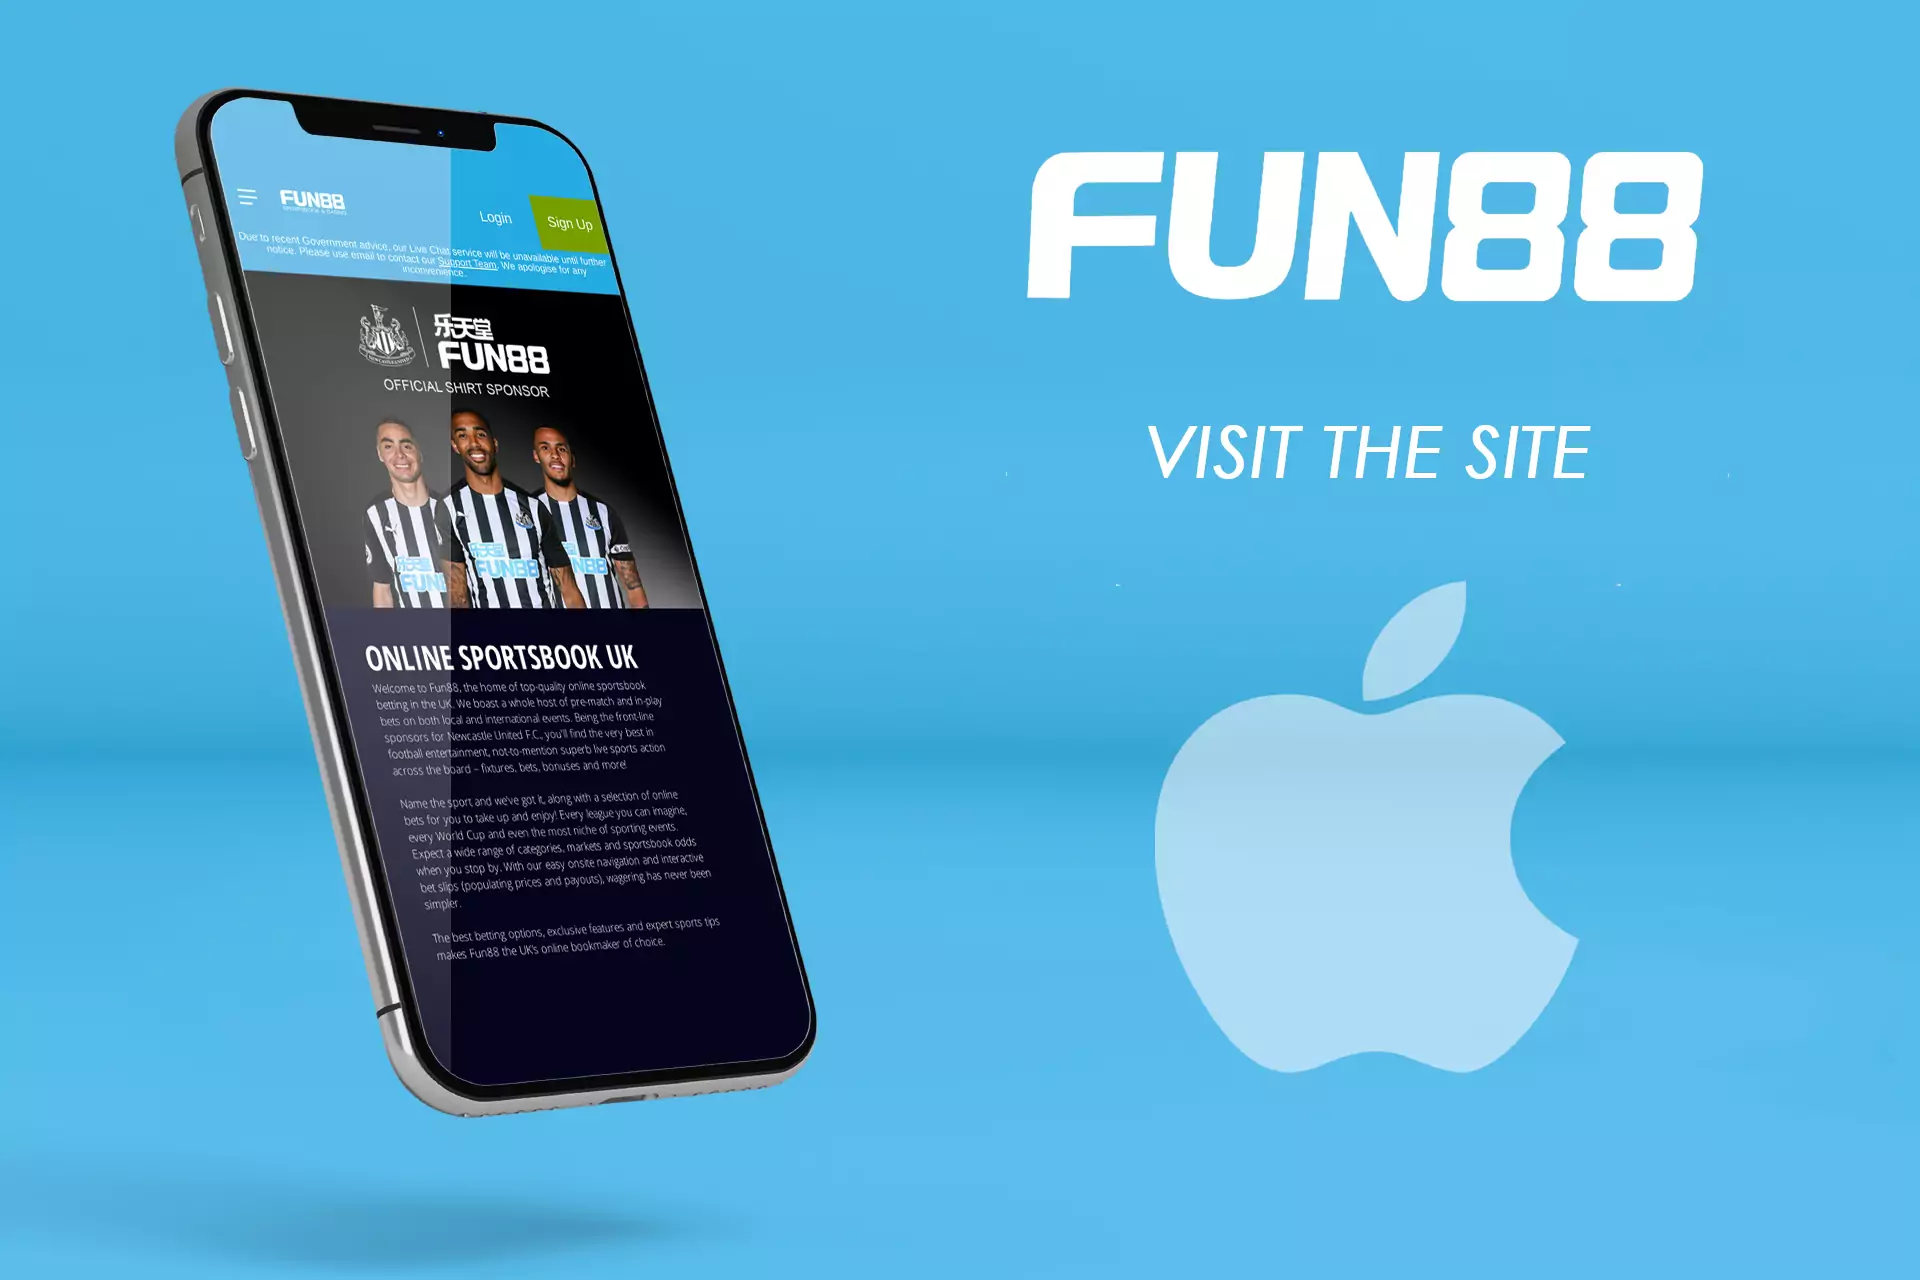 Visit the homepage of Fun88 and find a link to download the app.